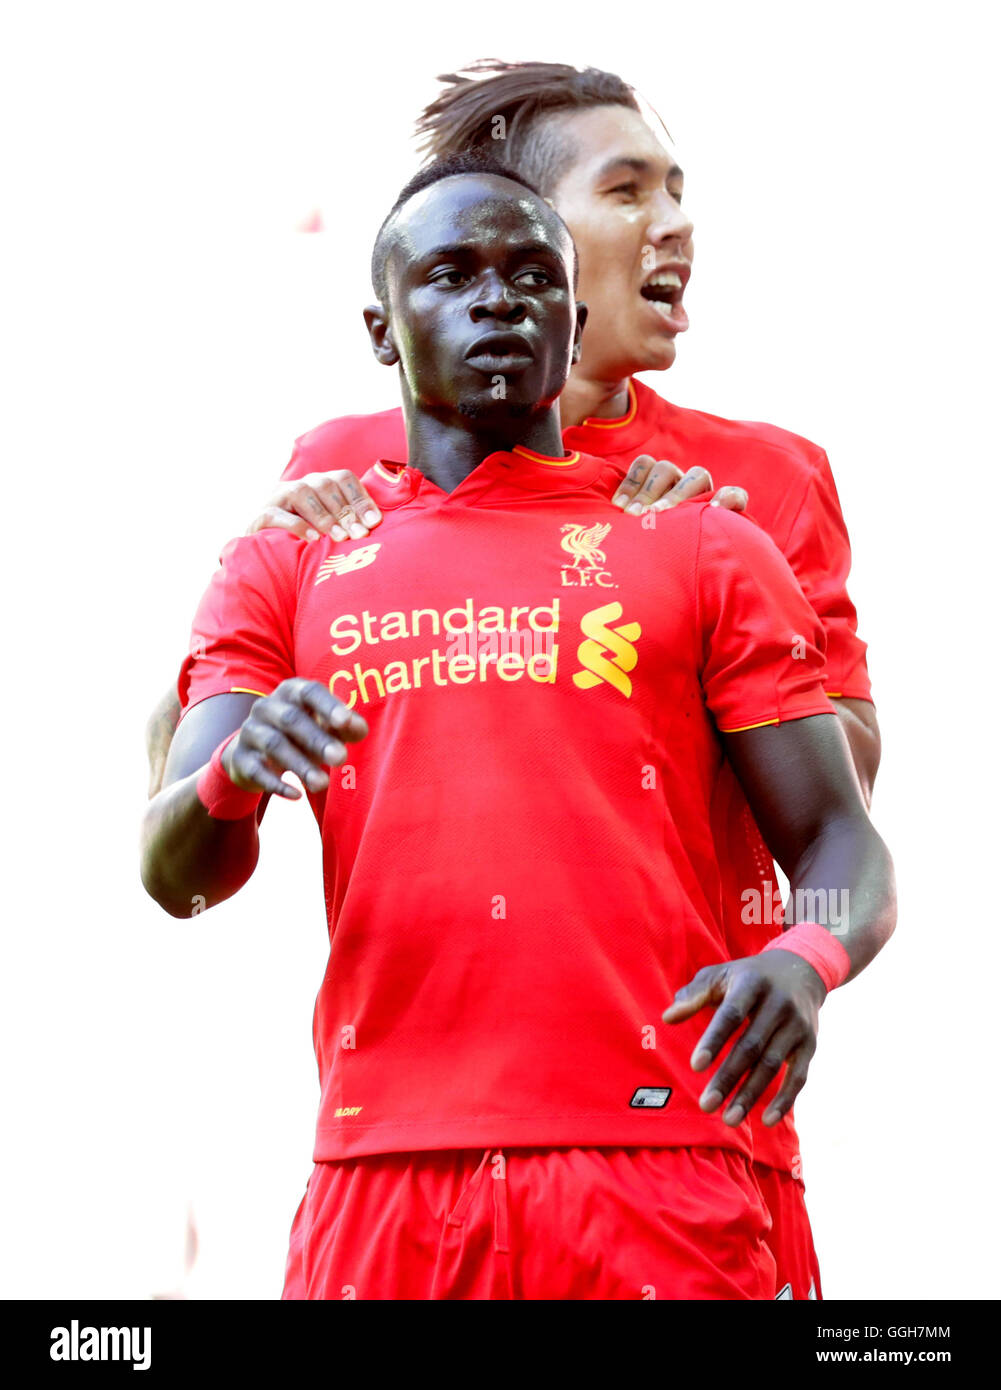 Liverpool's Sadio Mane celebrates scoring his side's first goal of the game with teammate Roberto Firmino during the pre-season friendly match at Wembley Stadium, London. PRESS ASSOCIATION Photo. Picture date: Saturday August 6, 2016. See PA story SOCCER Liverpool. Photo credit should read: Adam Davy/PA Wire. RESTRICTIONS: No use with unauthorised audio, video, data, fixture lists, club/league logos or 'live' services. Online in-match use limited to 75 images, no video emulation. No use in betting, games or single club/league/player publications. Stock Photo